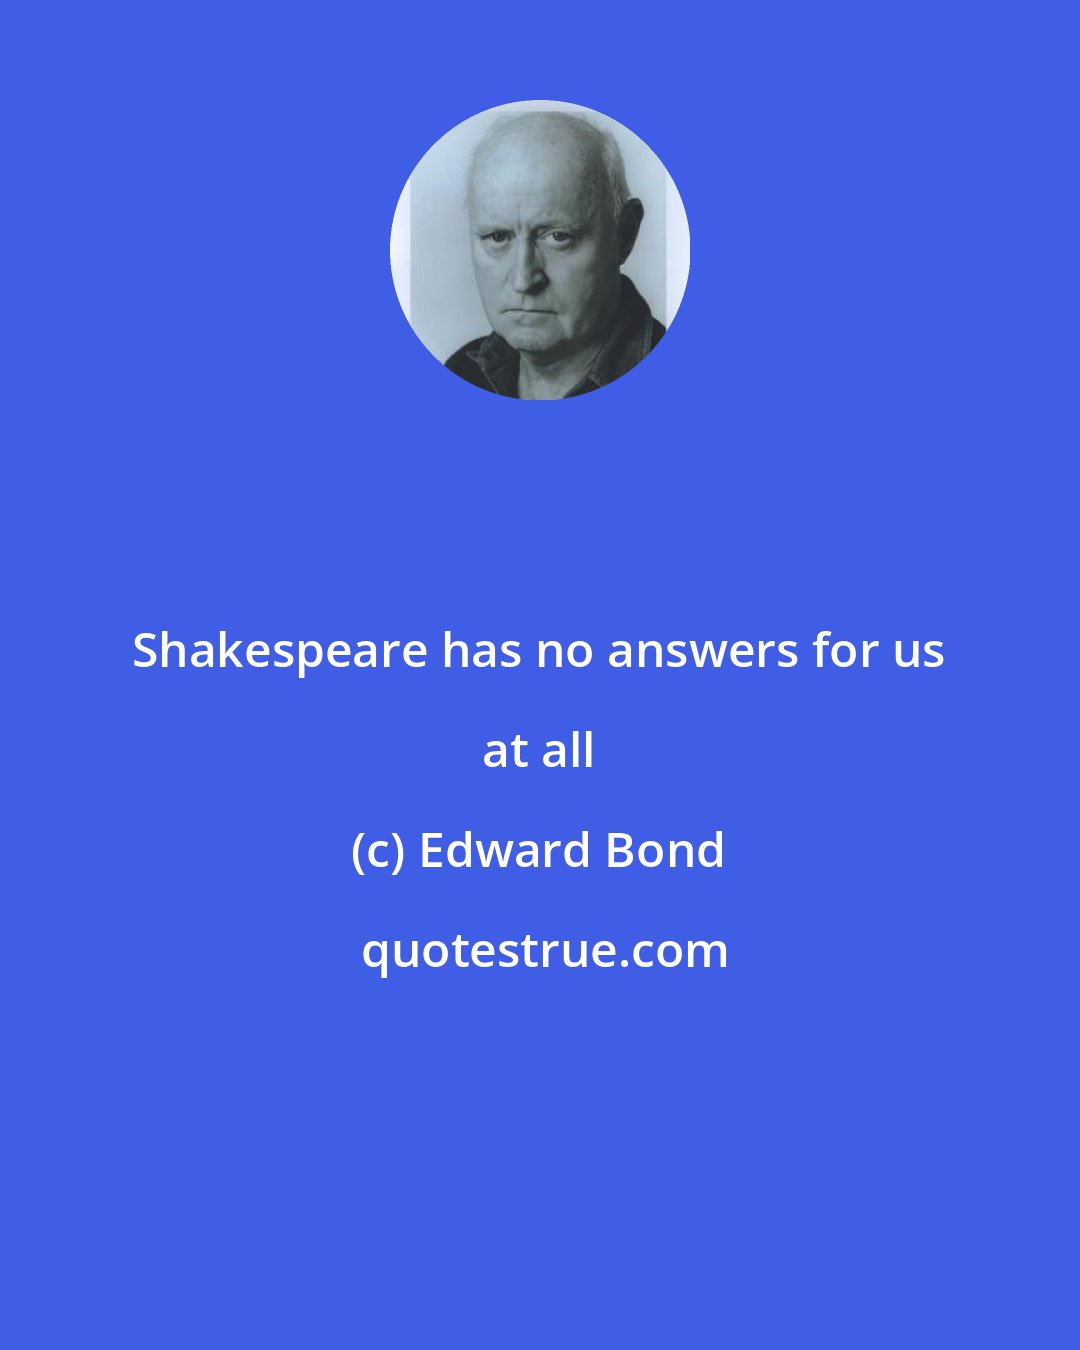 Edward Bond: Shakespeare has no answers for us at all